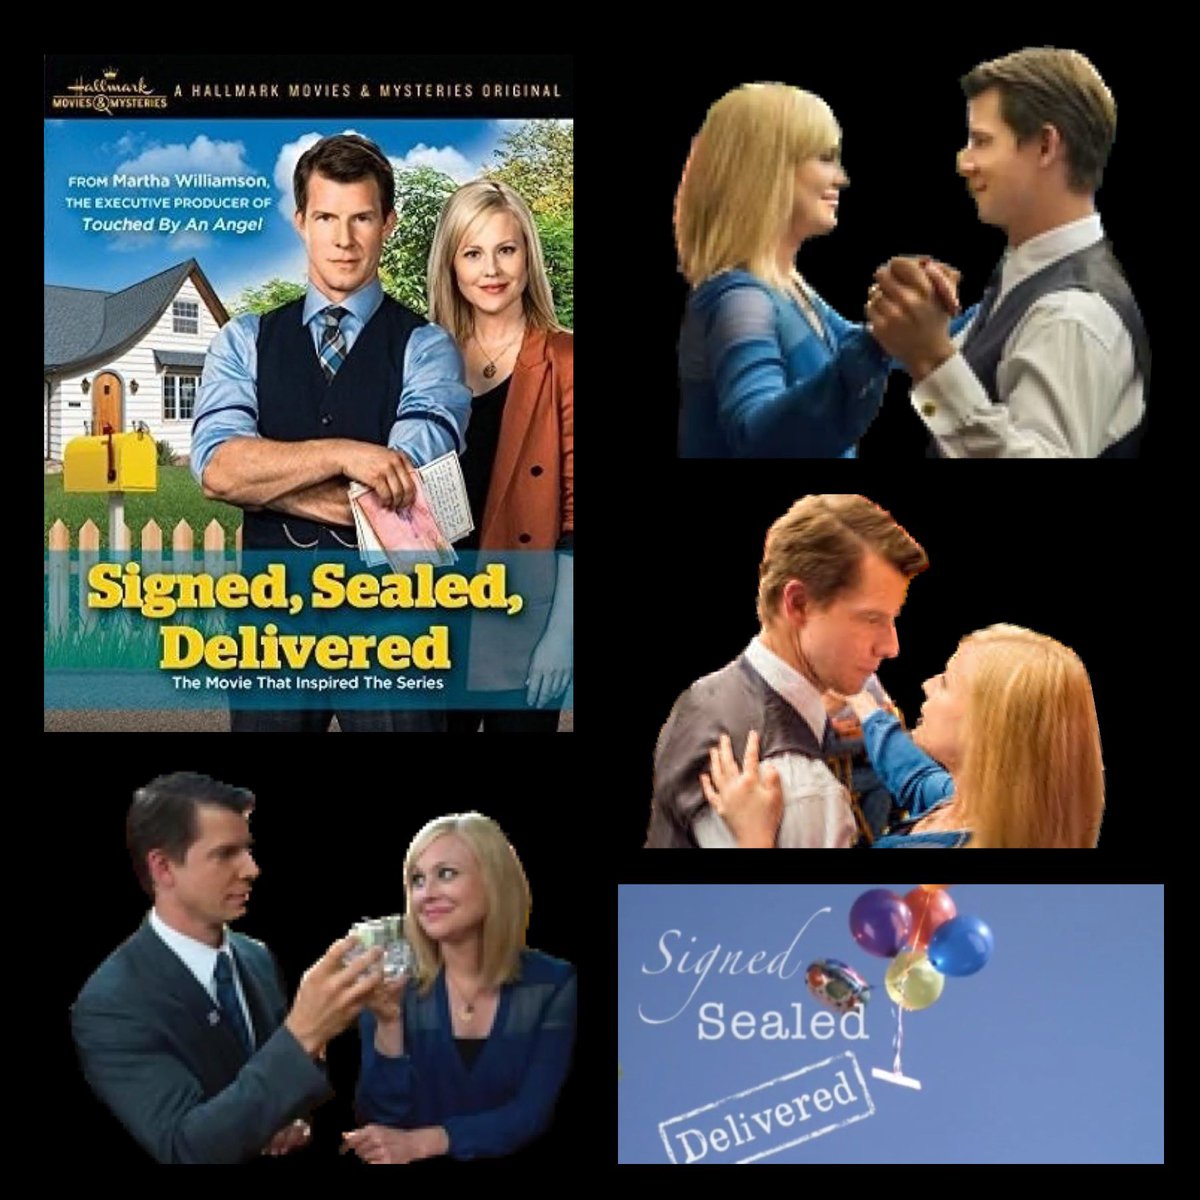 It’s #SignedSealedDelivered Anniversary♥️. 
Our life’s have been enriched so much by this wonderful movie that @MarthaMoonWater created. From the bottom of our hearts Thank you!♥️♥️ #POstables 
@hallmarkmovie 
@ElizabethYostHC 
@SamanthaDiPippo 
#LisaHamiltonDaly 
#WonyaLucas